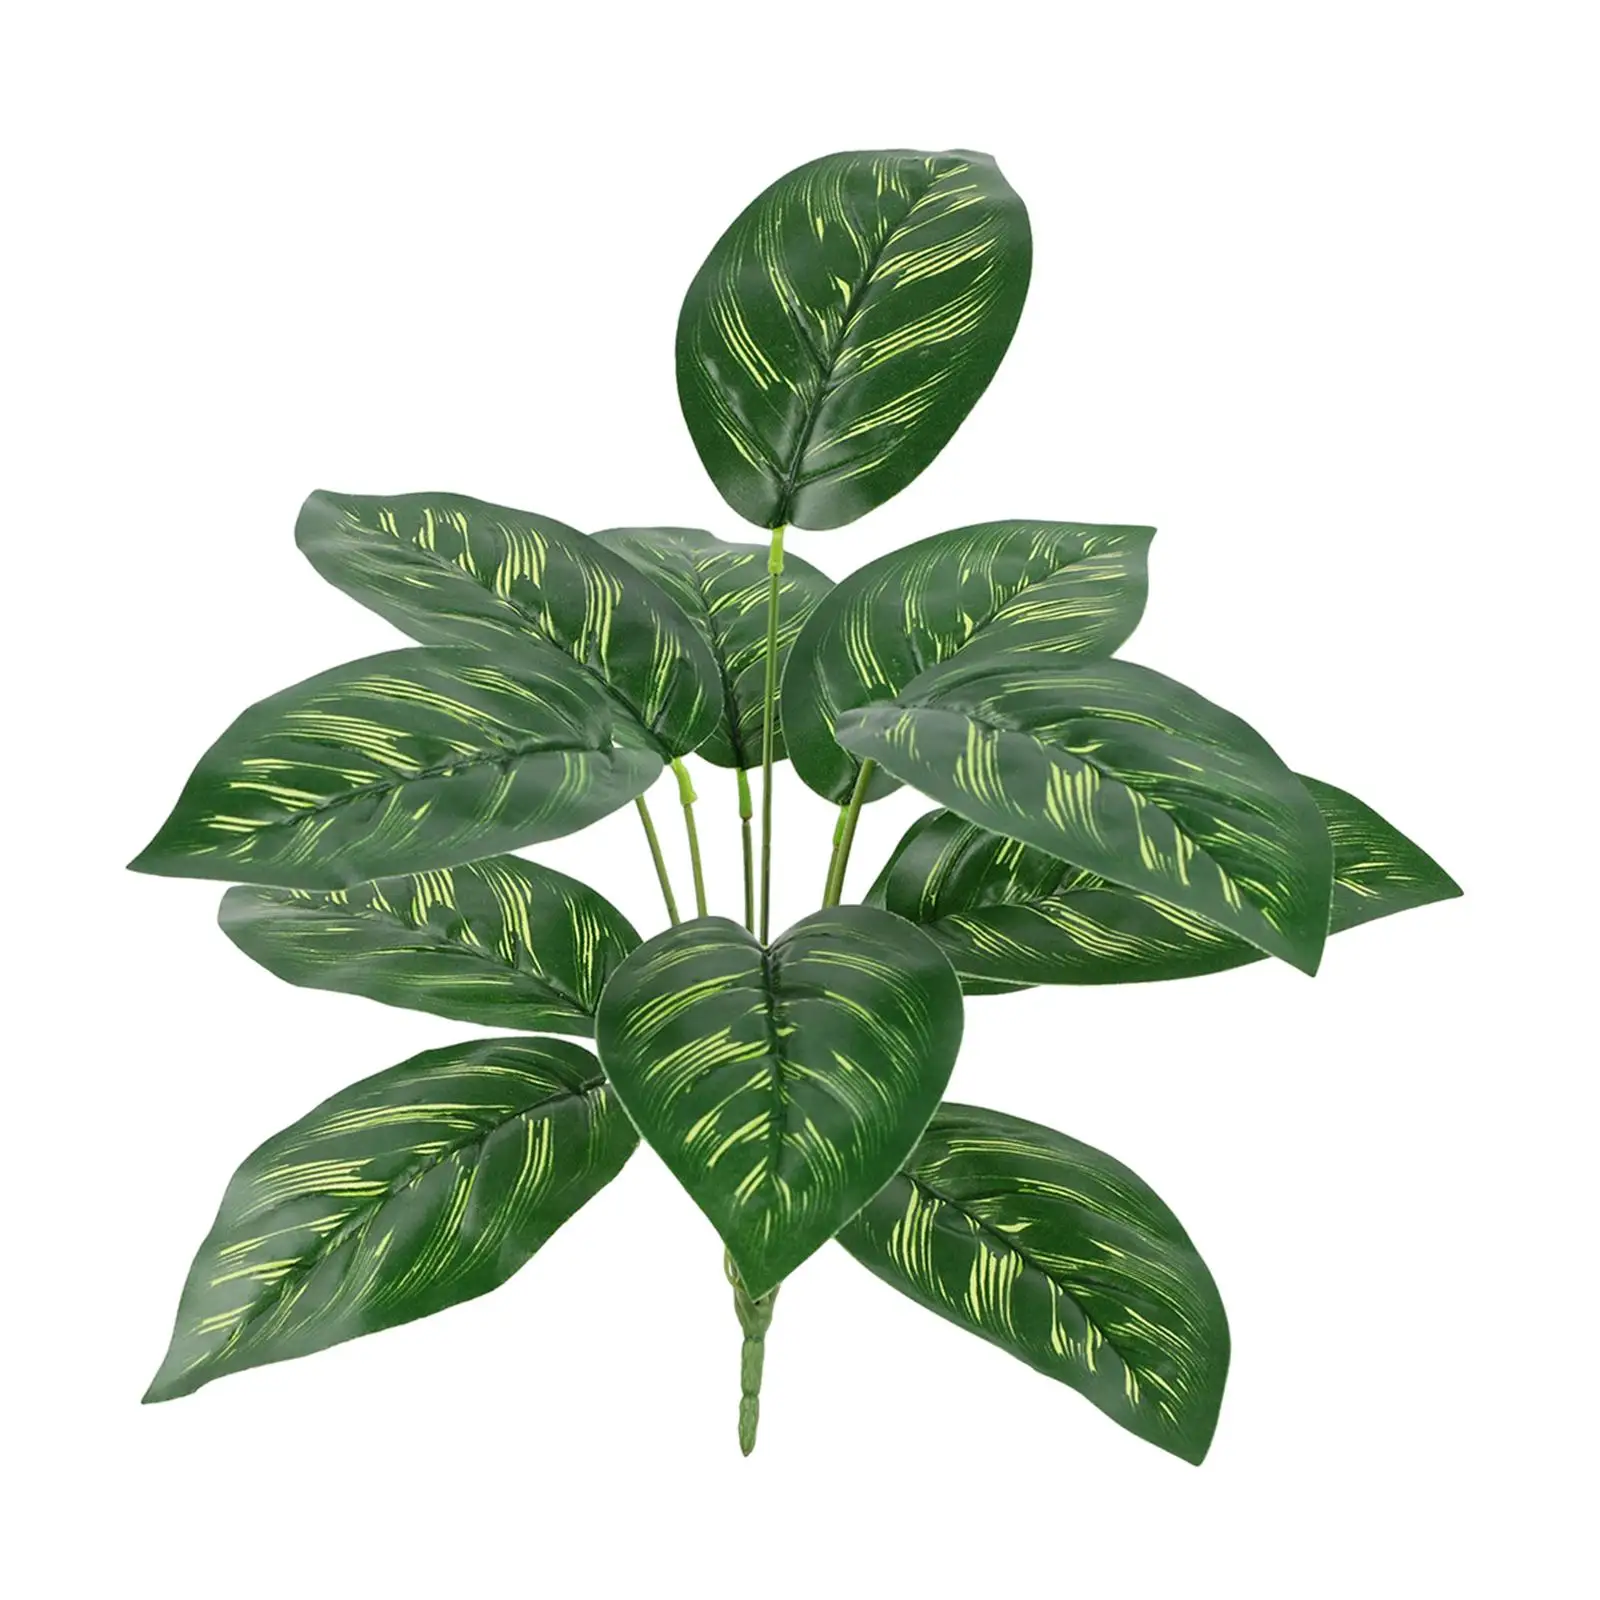 Faux Plants Realistic Photo Props Green Garden Decoration Home Decor Greenery Decoration for Home Office Kitchen Bathroom Shelf